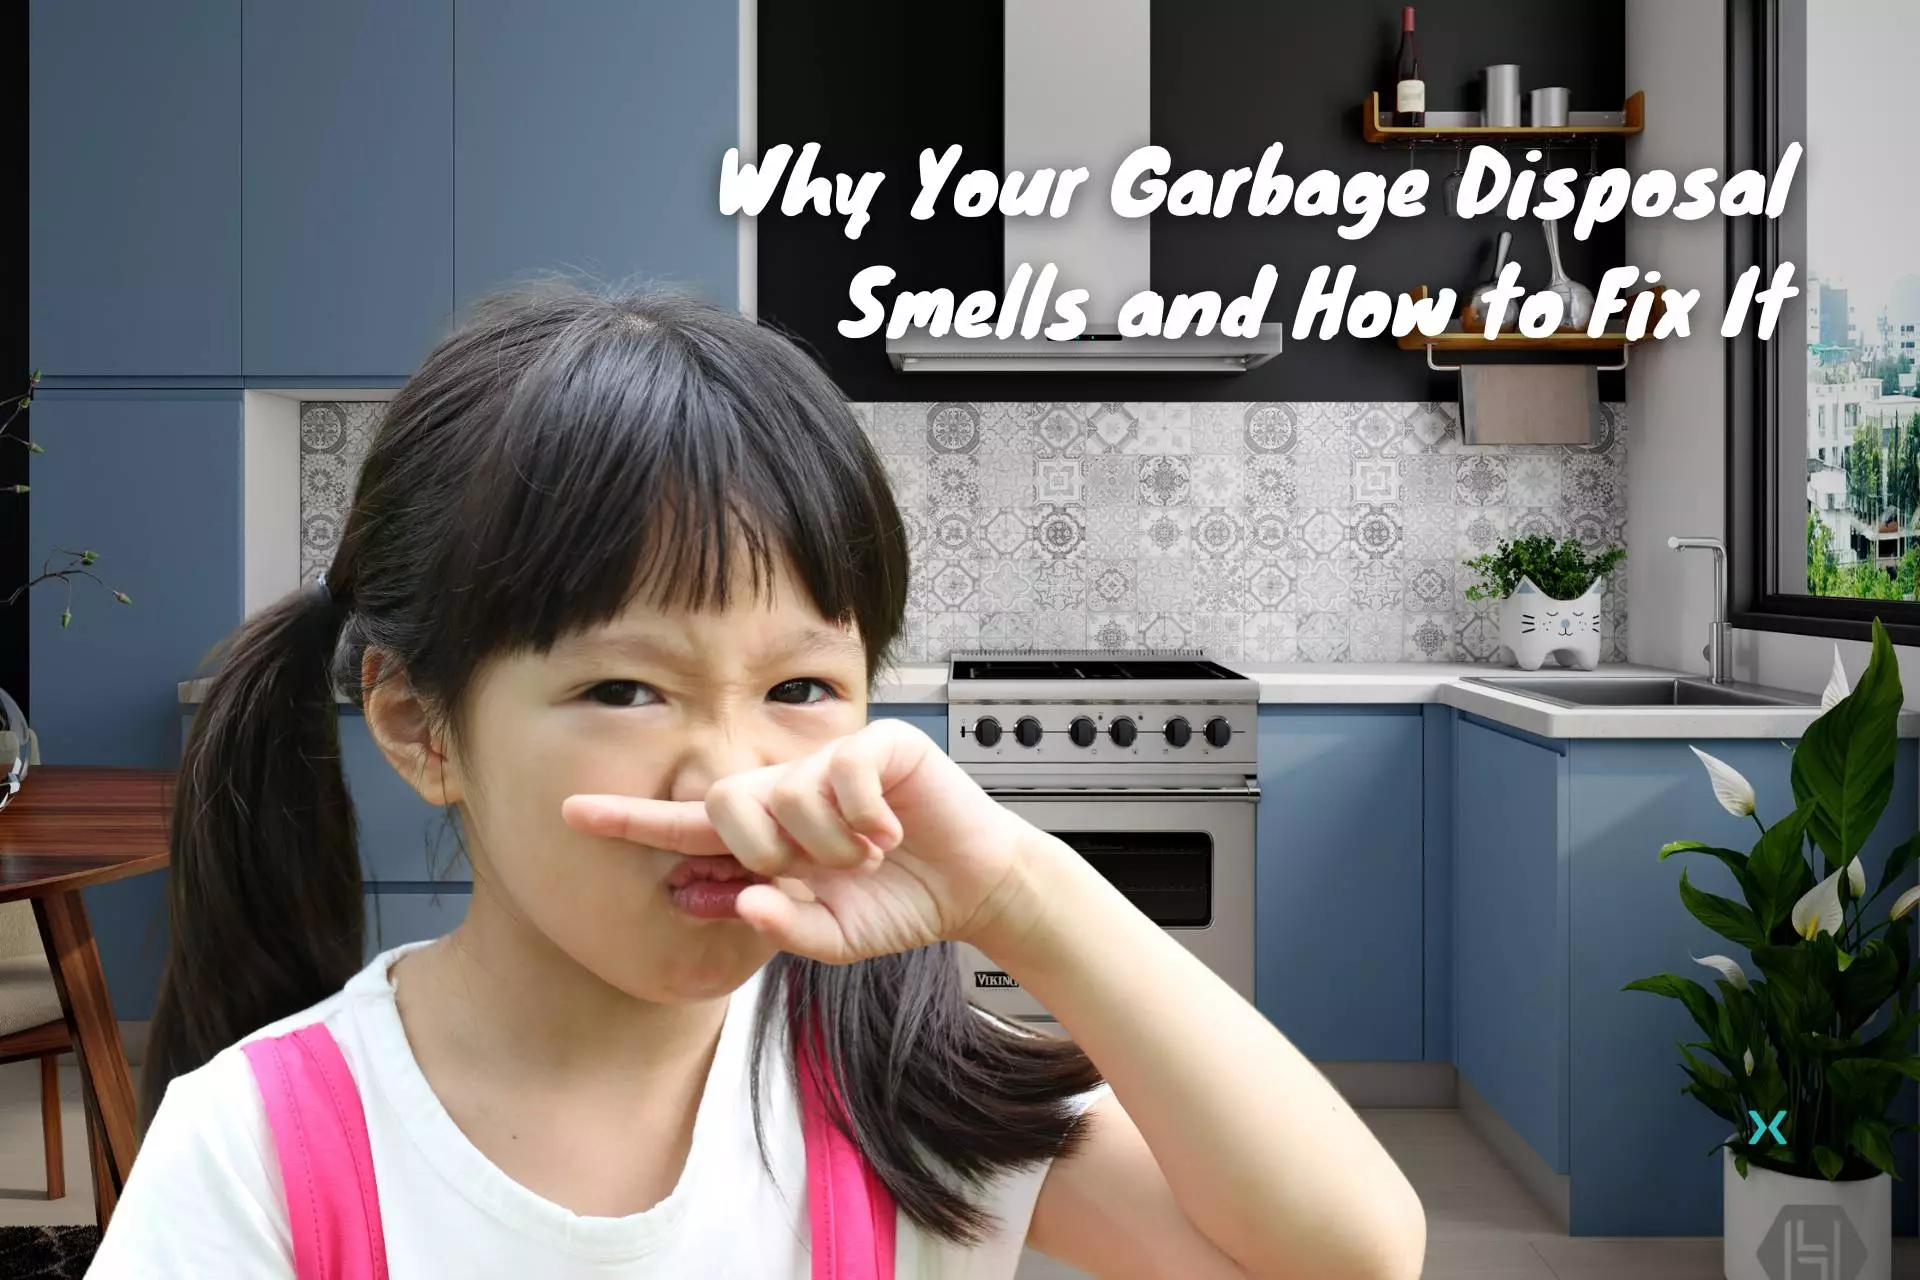 Why Your Garbage Disposal Smells and How to Fix It